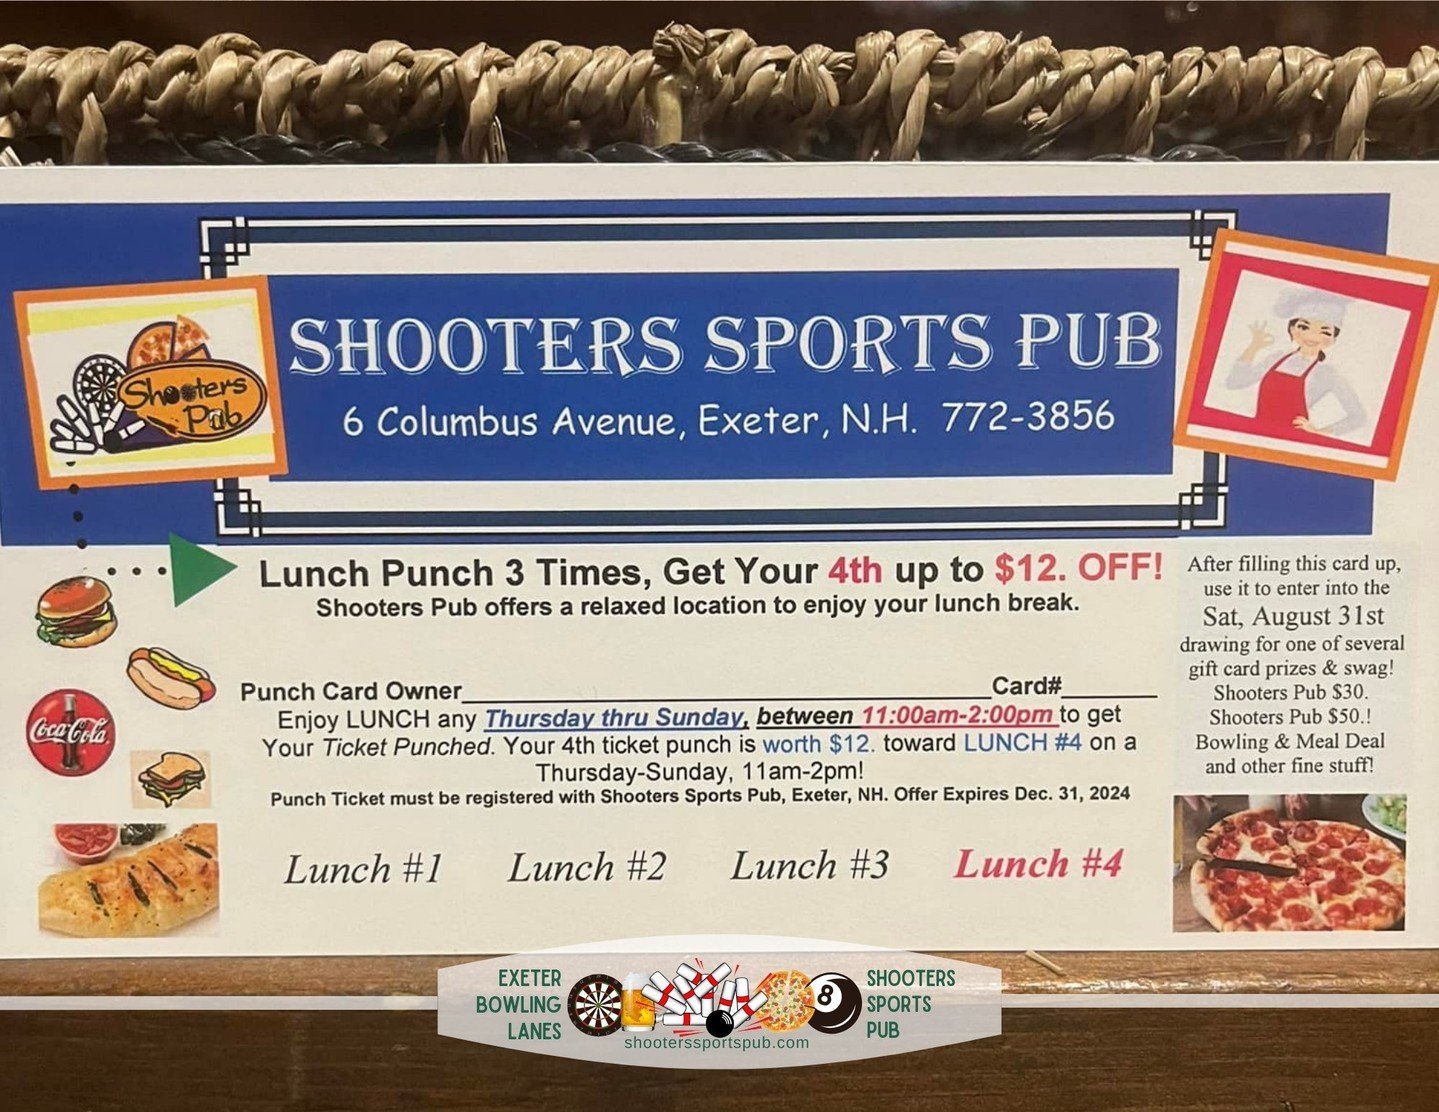 Lunch plans? We've got you sorted with our new Lunch Bunch Punch Card 🥪🍟 ⁠
⁠
Buy three lunches and get $12 off your 4th. Thurs-Sun, starting at 11 am in the pub! ⁠
⁠
#LunchBunch #SaveOnLunch⁠